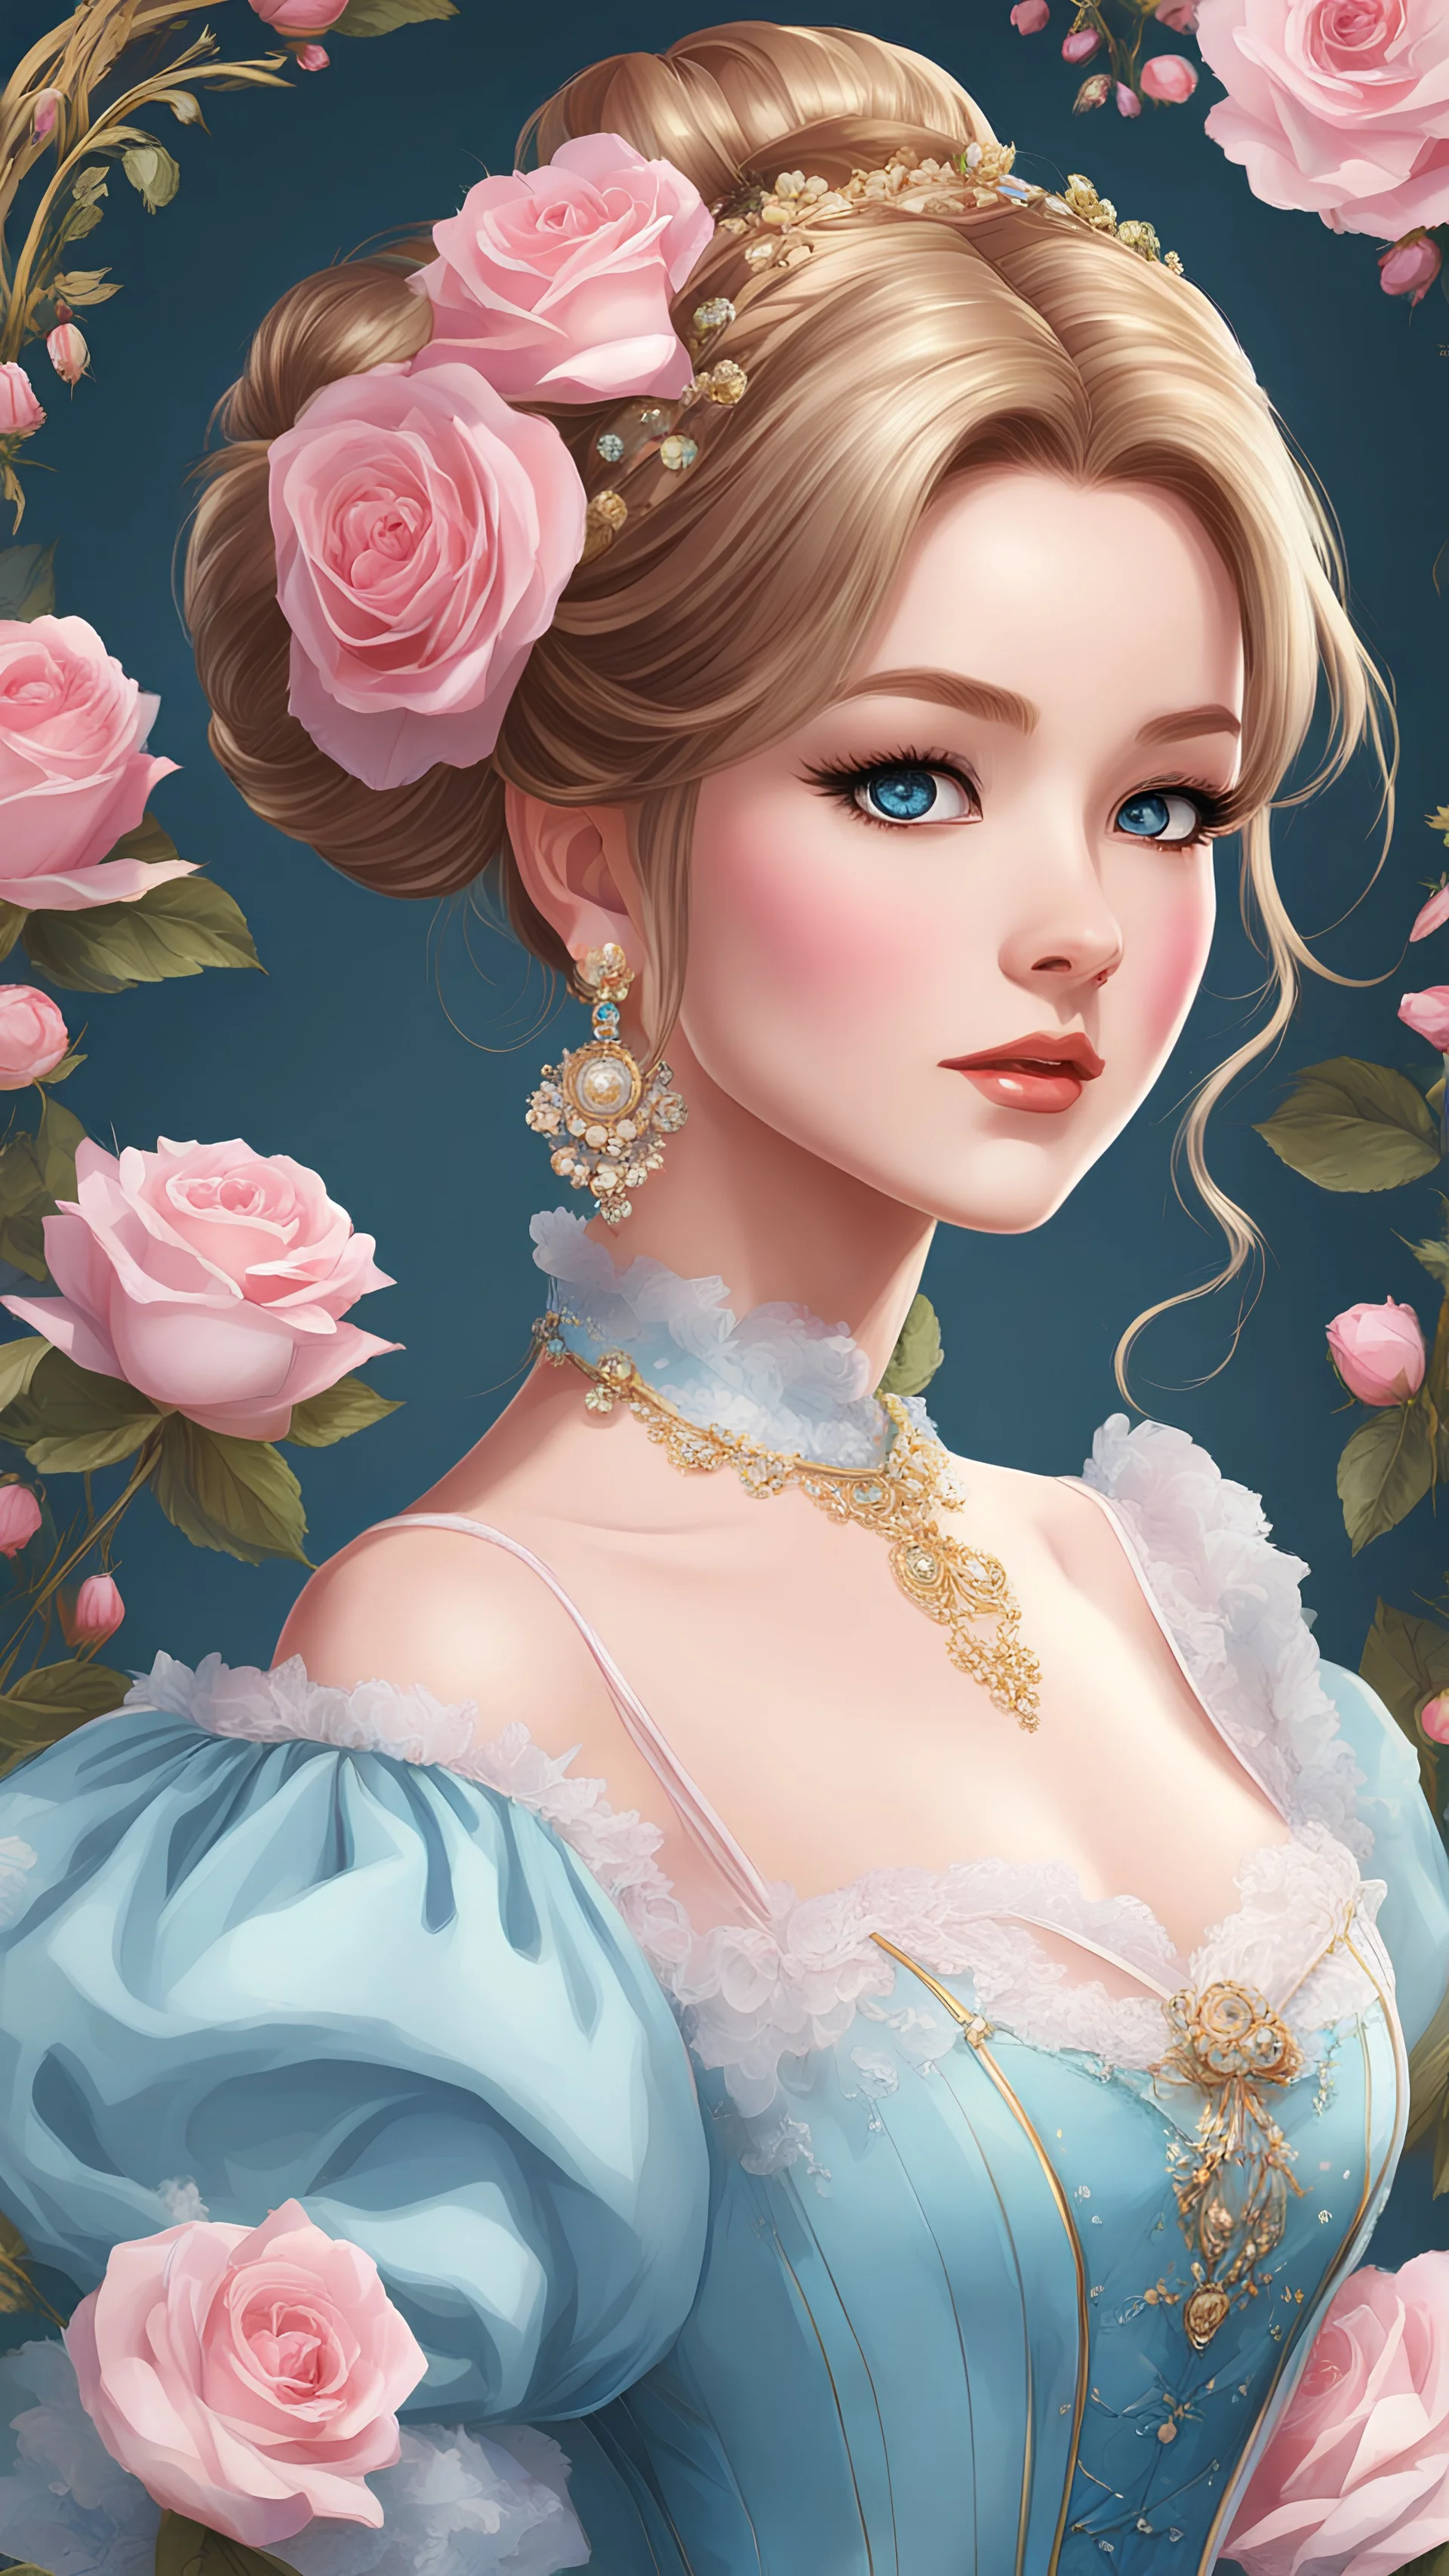 Please create a beautiful illustration of an anime girl with shiny golden chignon hair wearing a light blue Victorian dress. Her eyes should be lovely and captivating. Surround her with pink roses for a touch of elegance and romance.